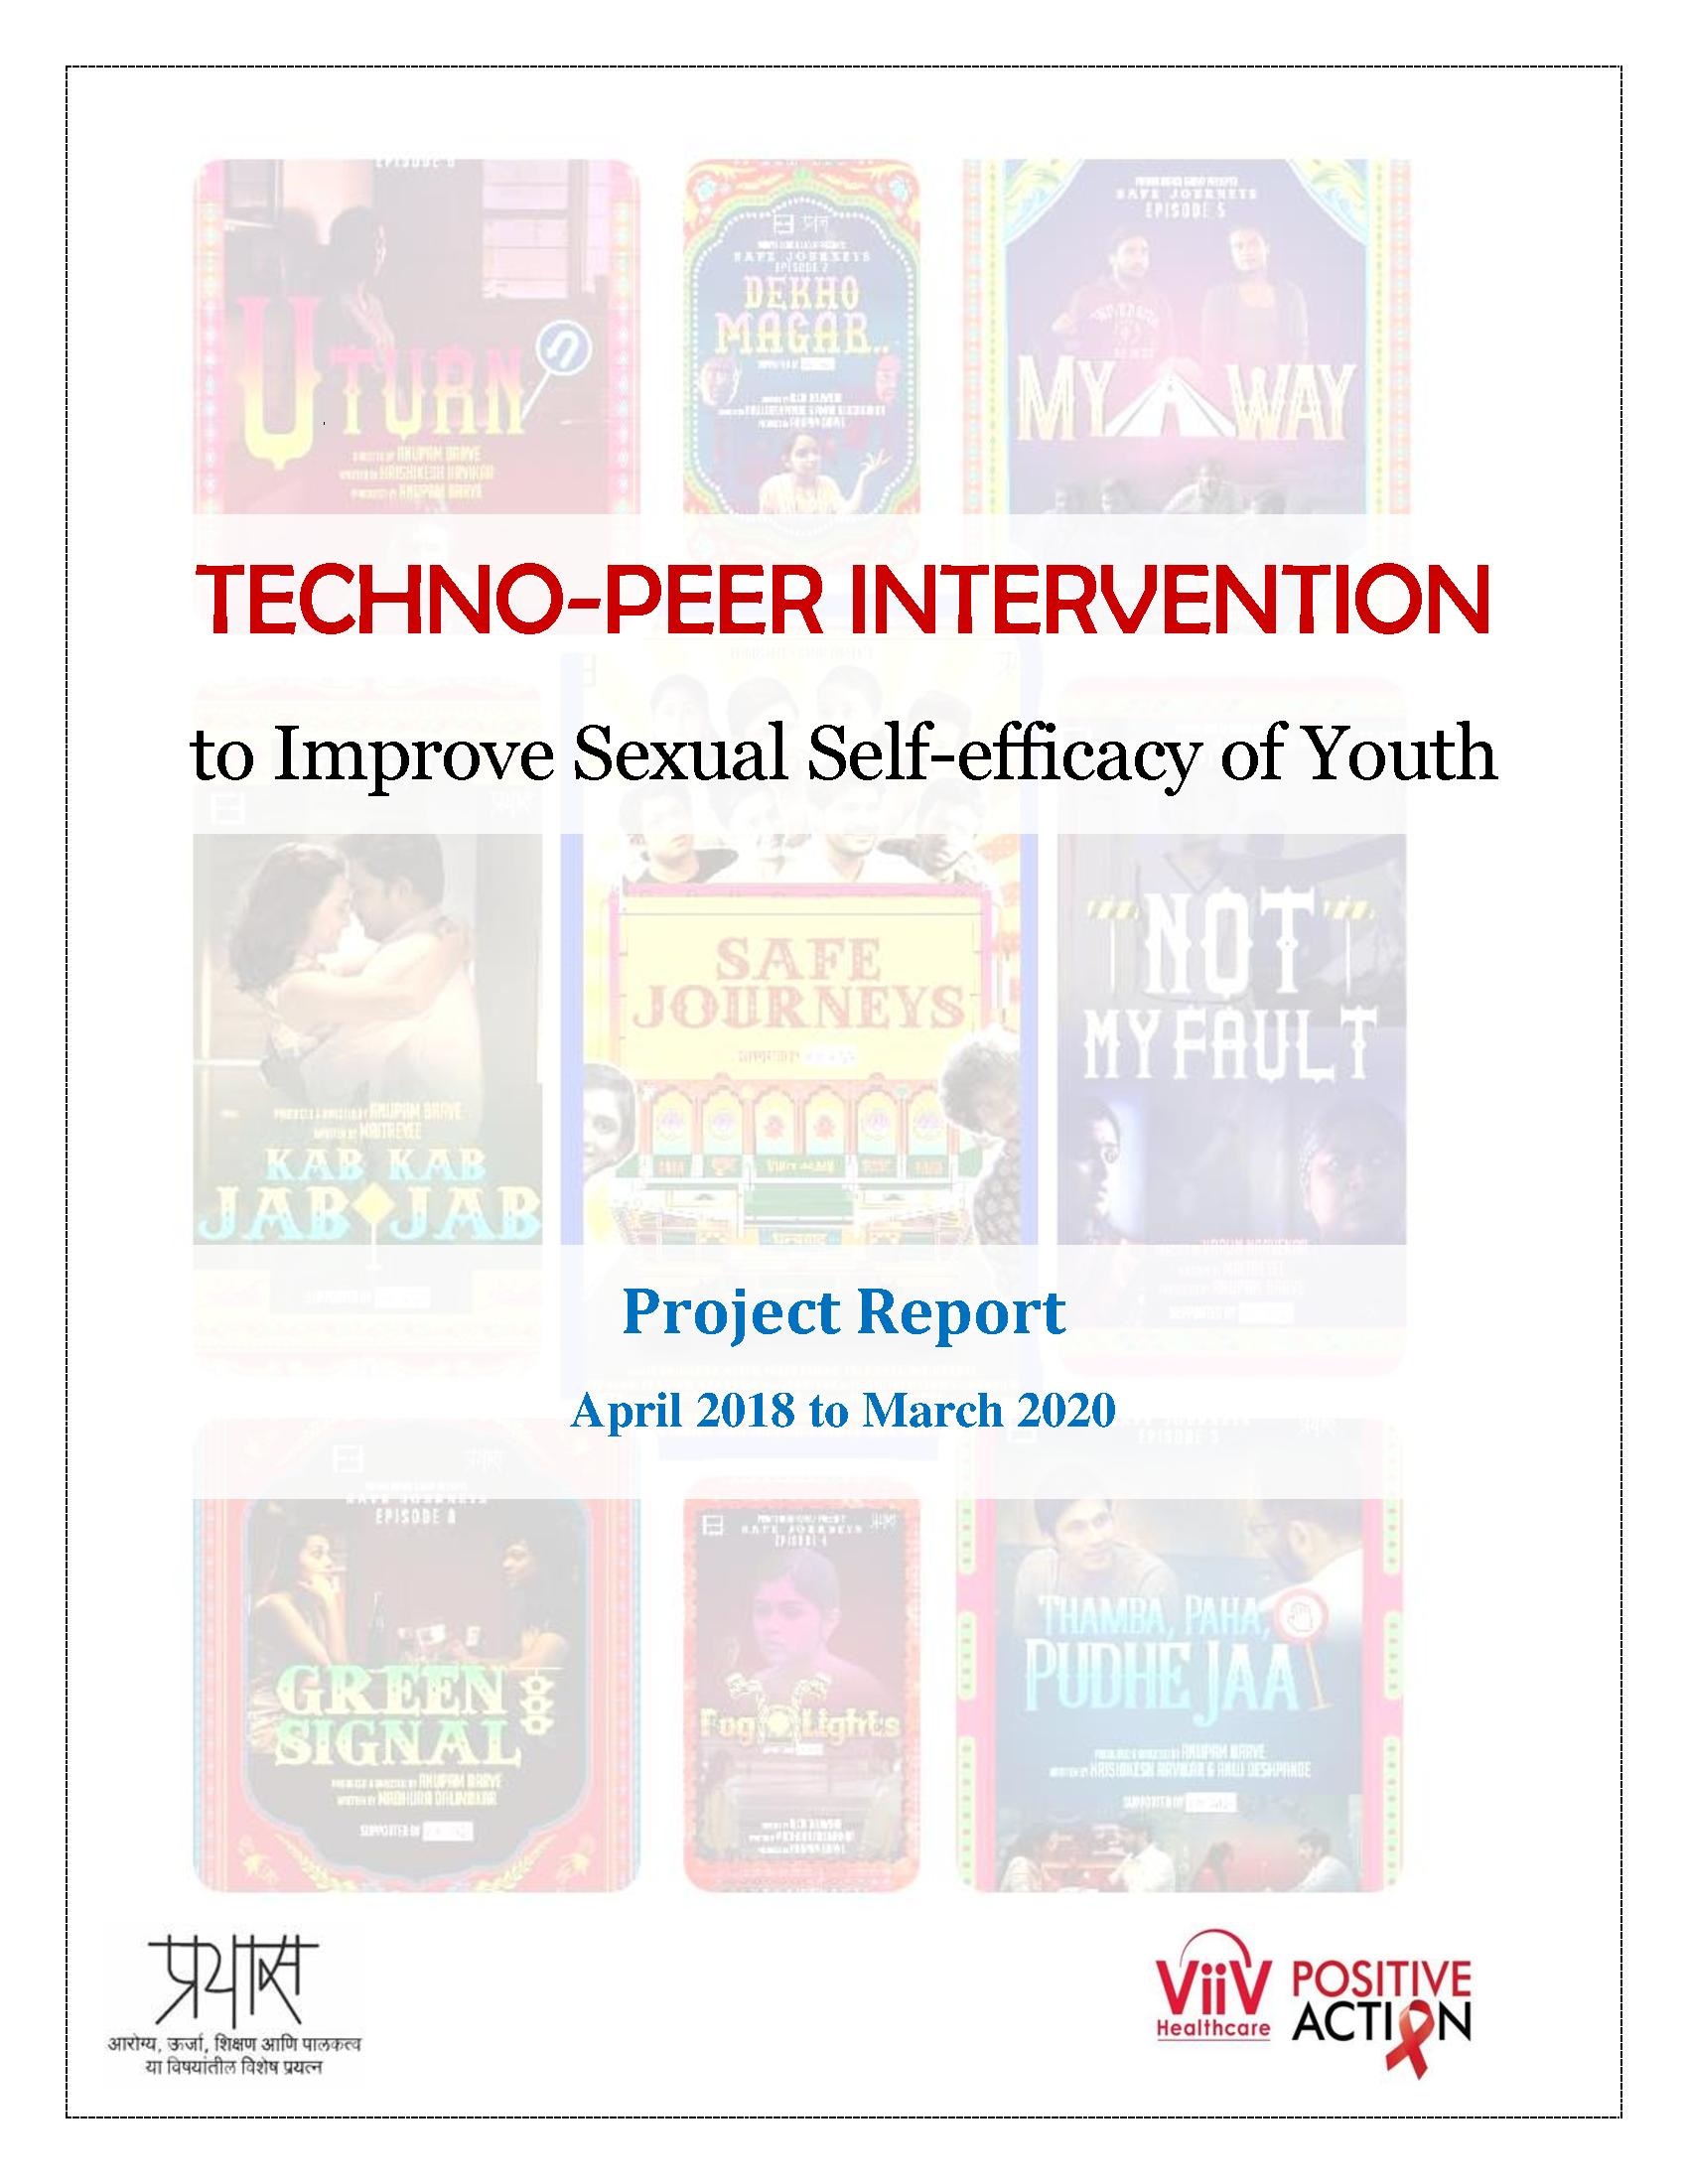 Techno-Peer Intervention to improve Sexual Self Efficacy of Youth